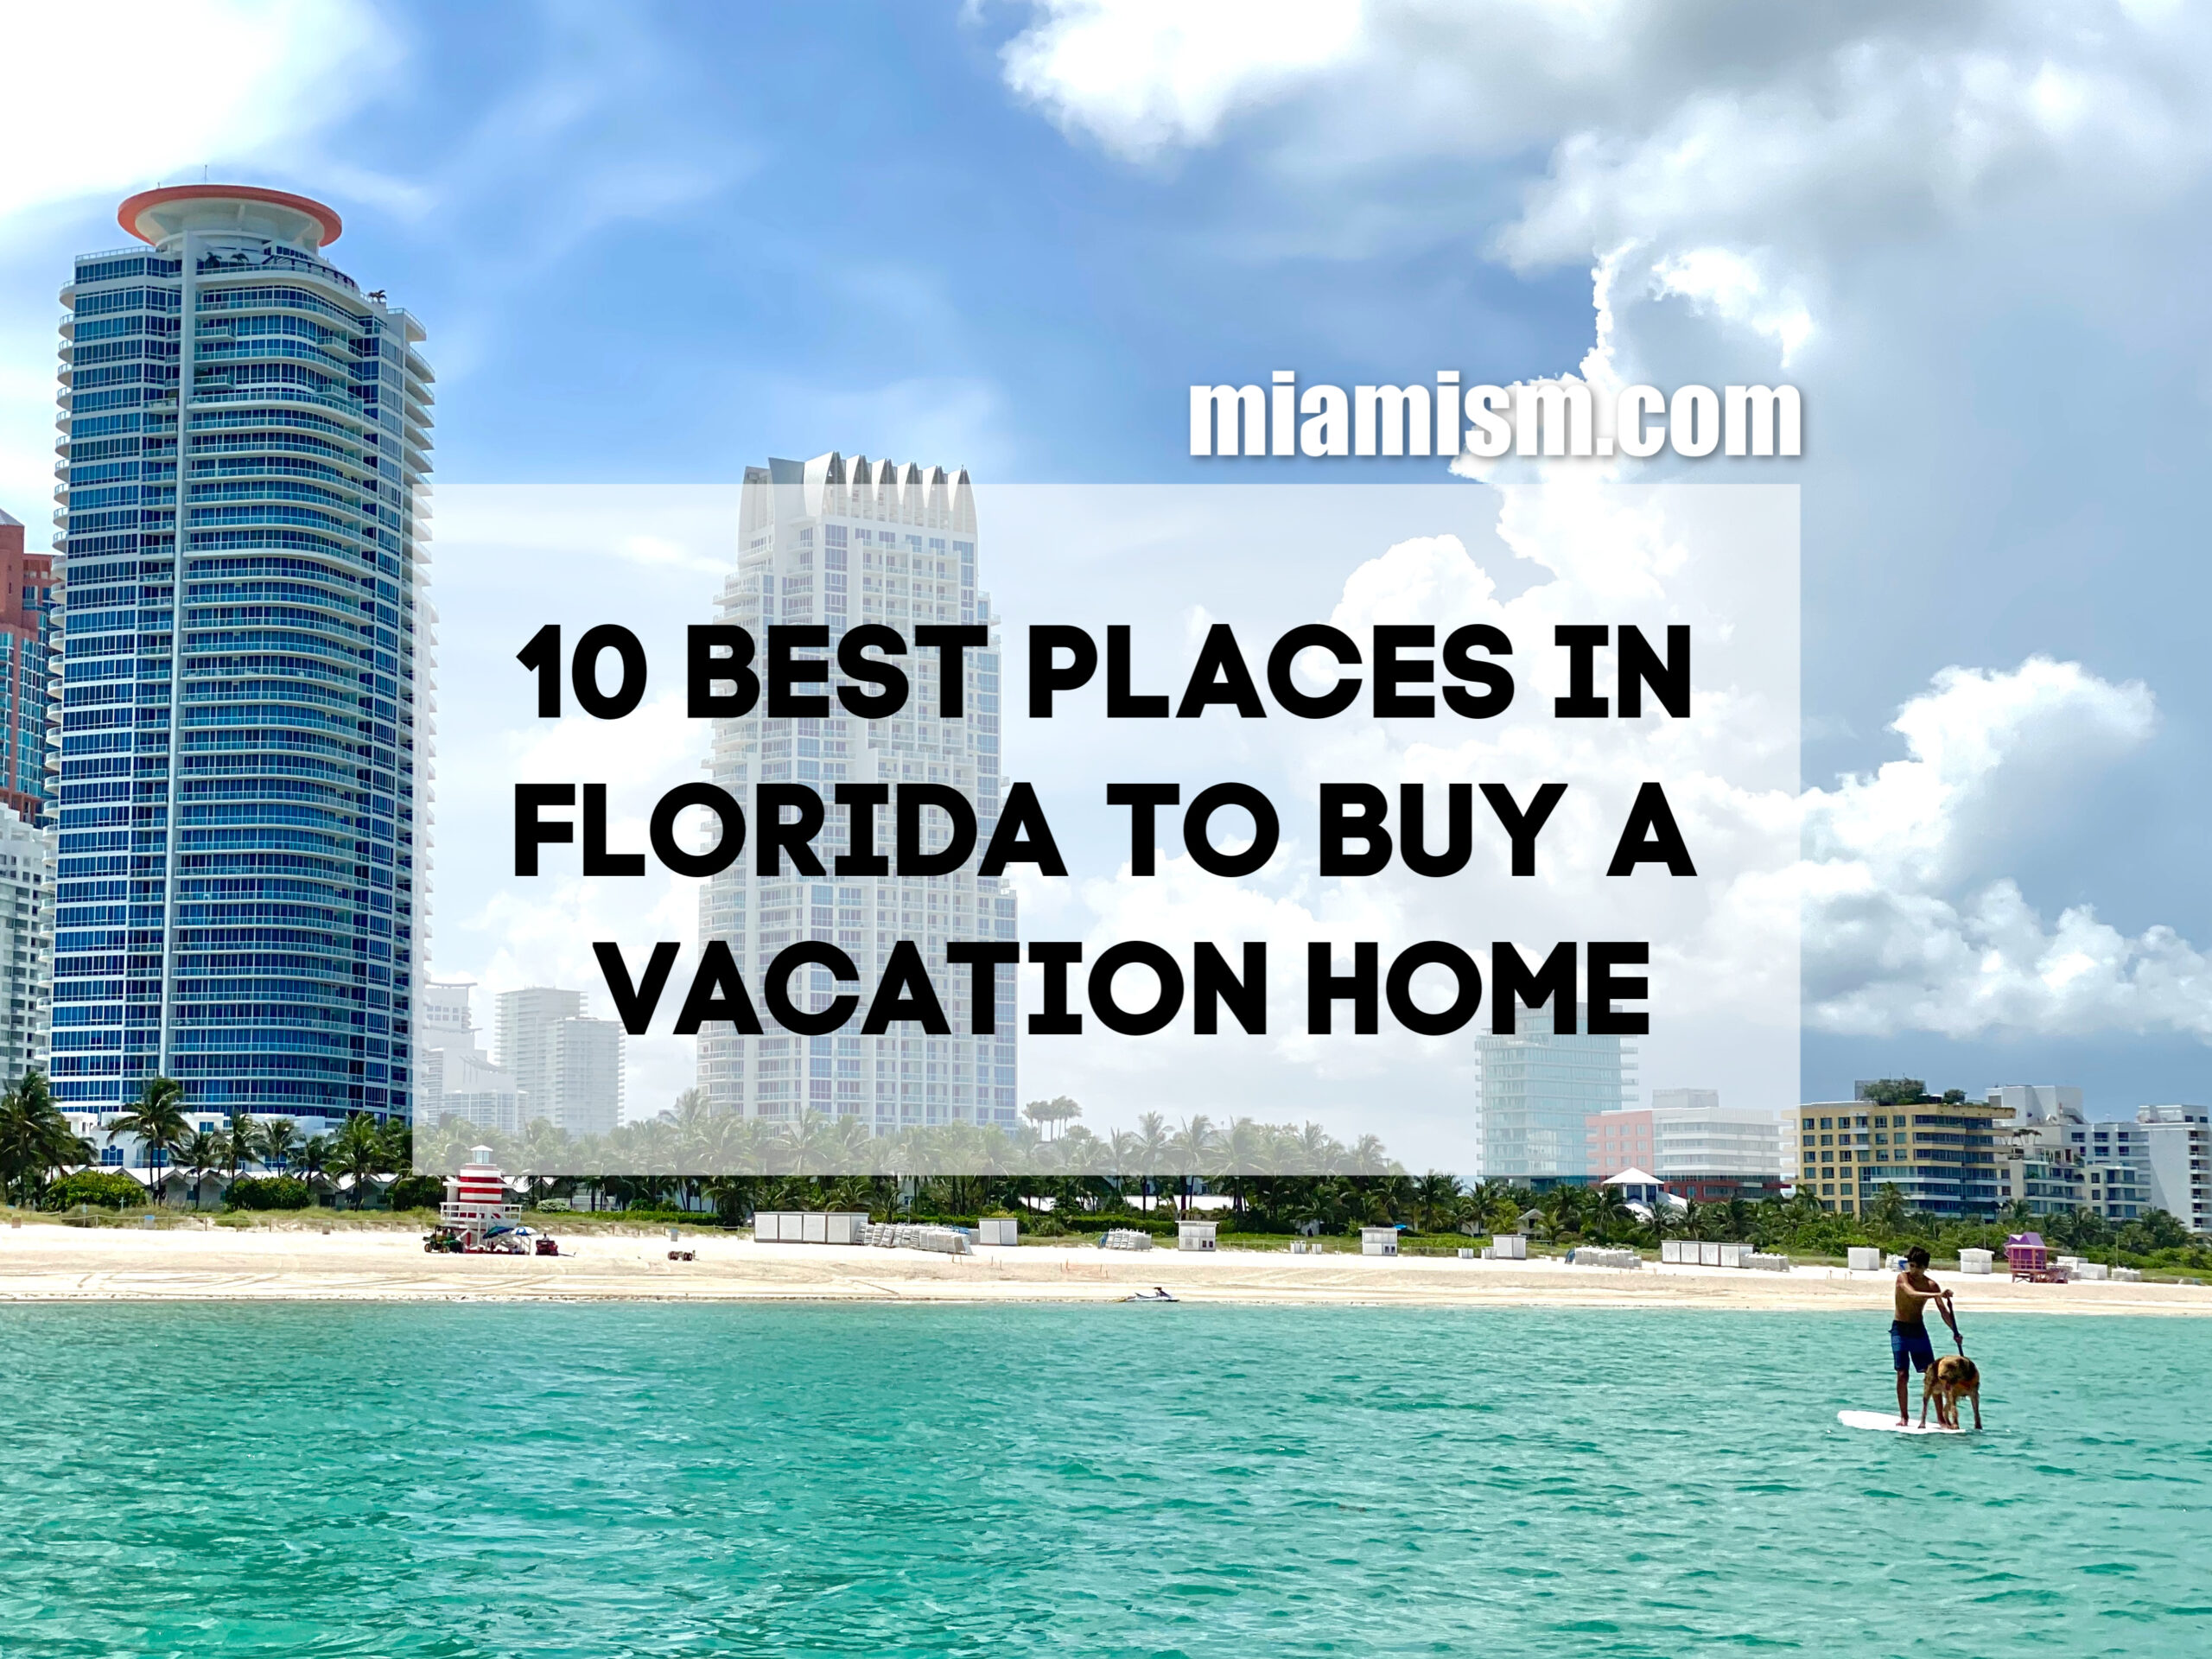 miami-beach-makes-list-10-best-places-florida-buy-a-vacation-home